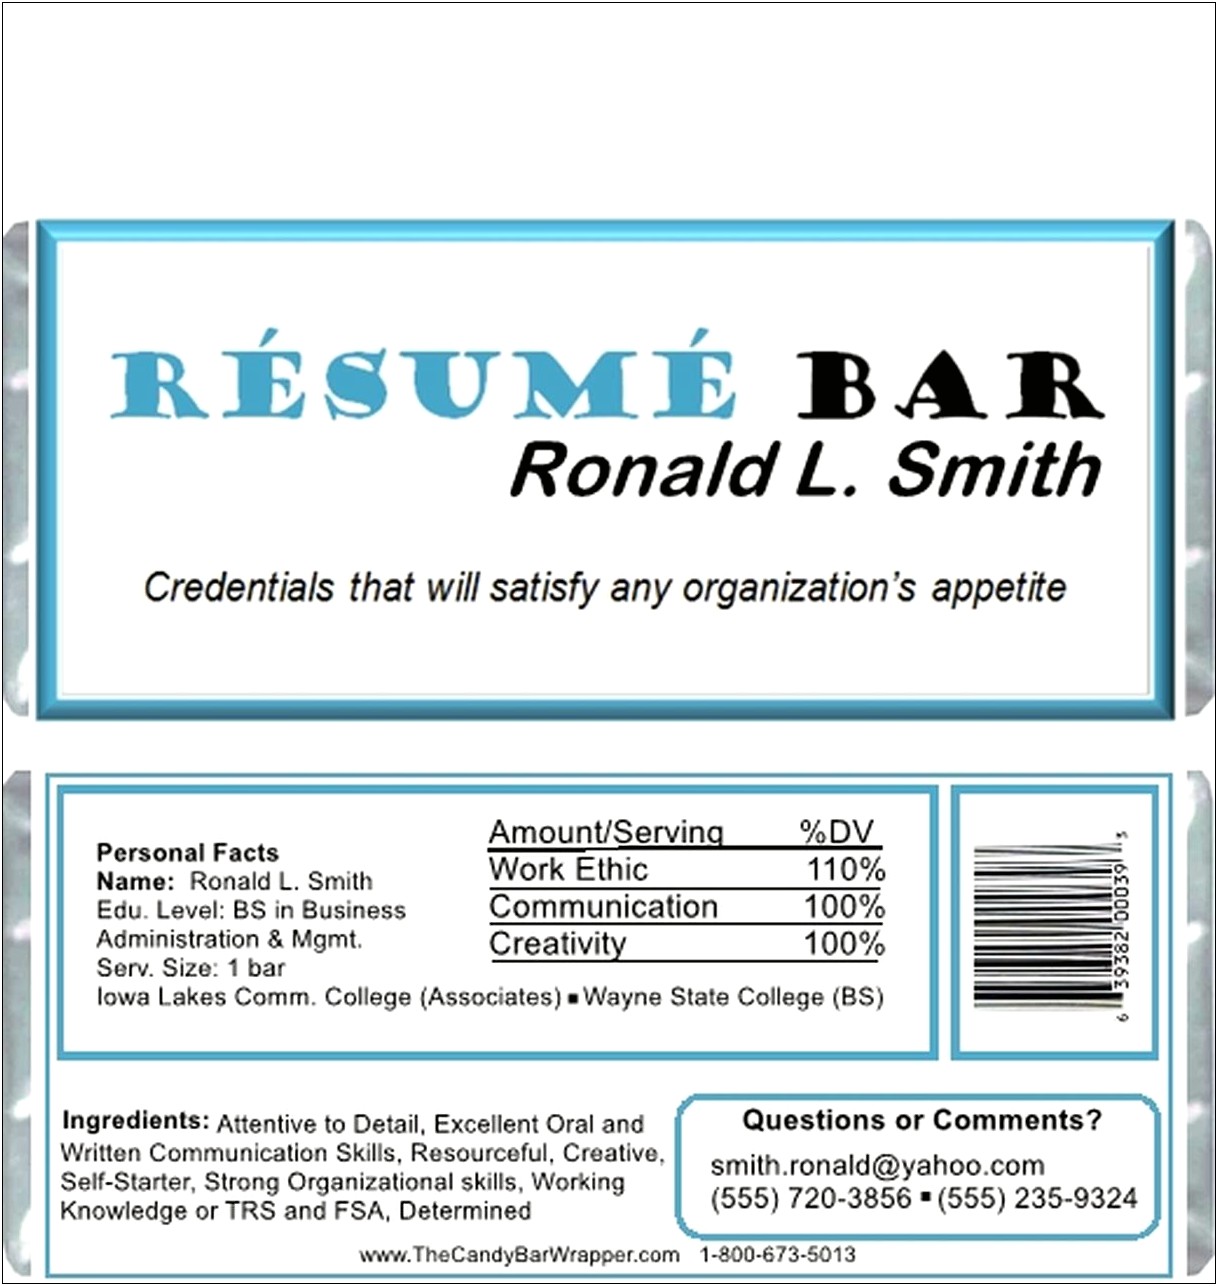 Resume For Working In A Bar